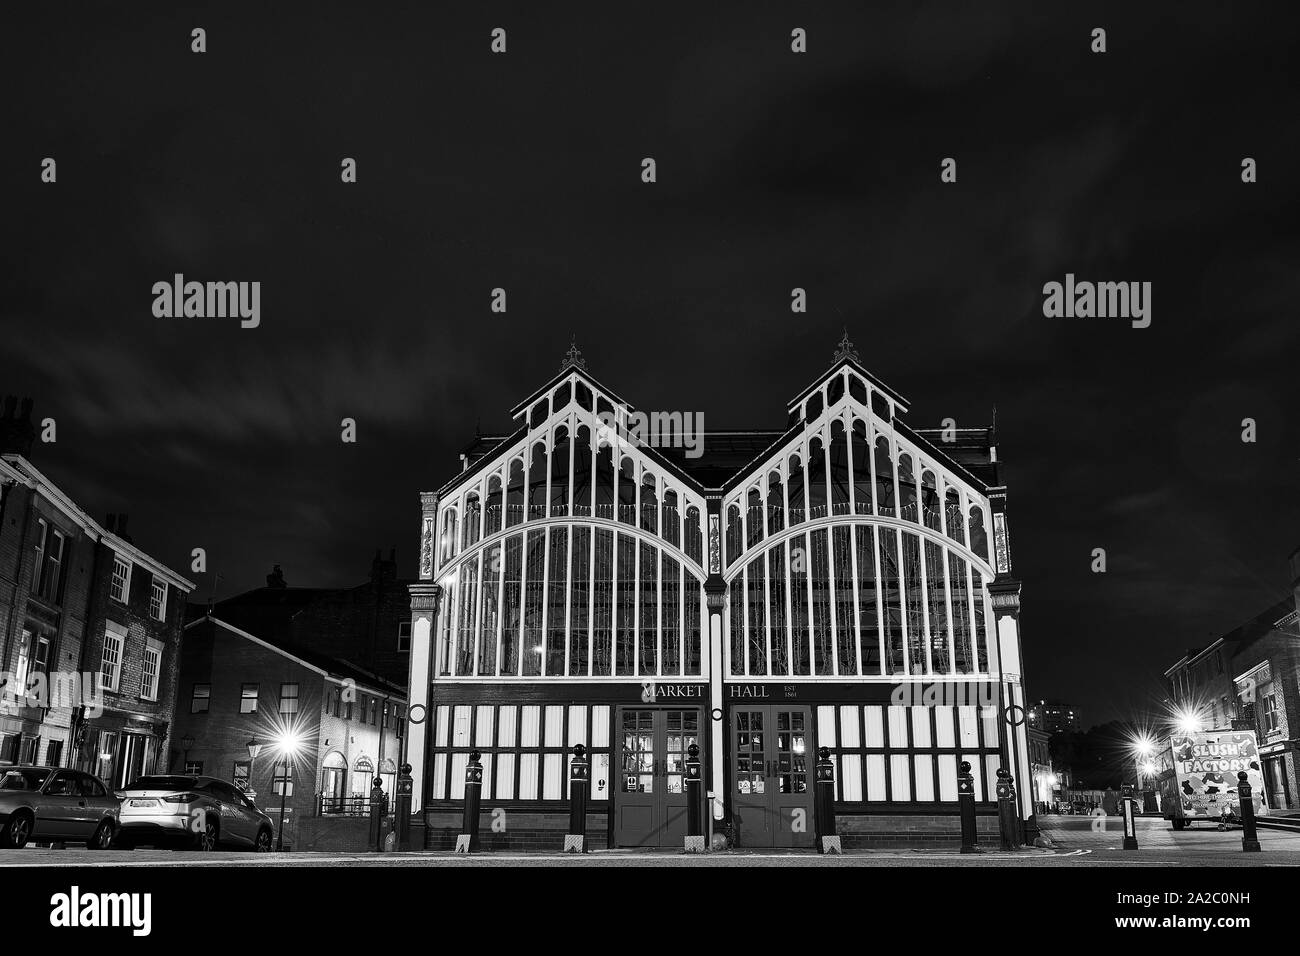 Market Hall at night in black and white, Stockport, North West England Stock Photo